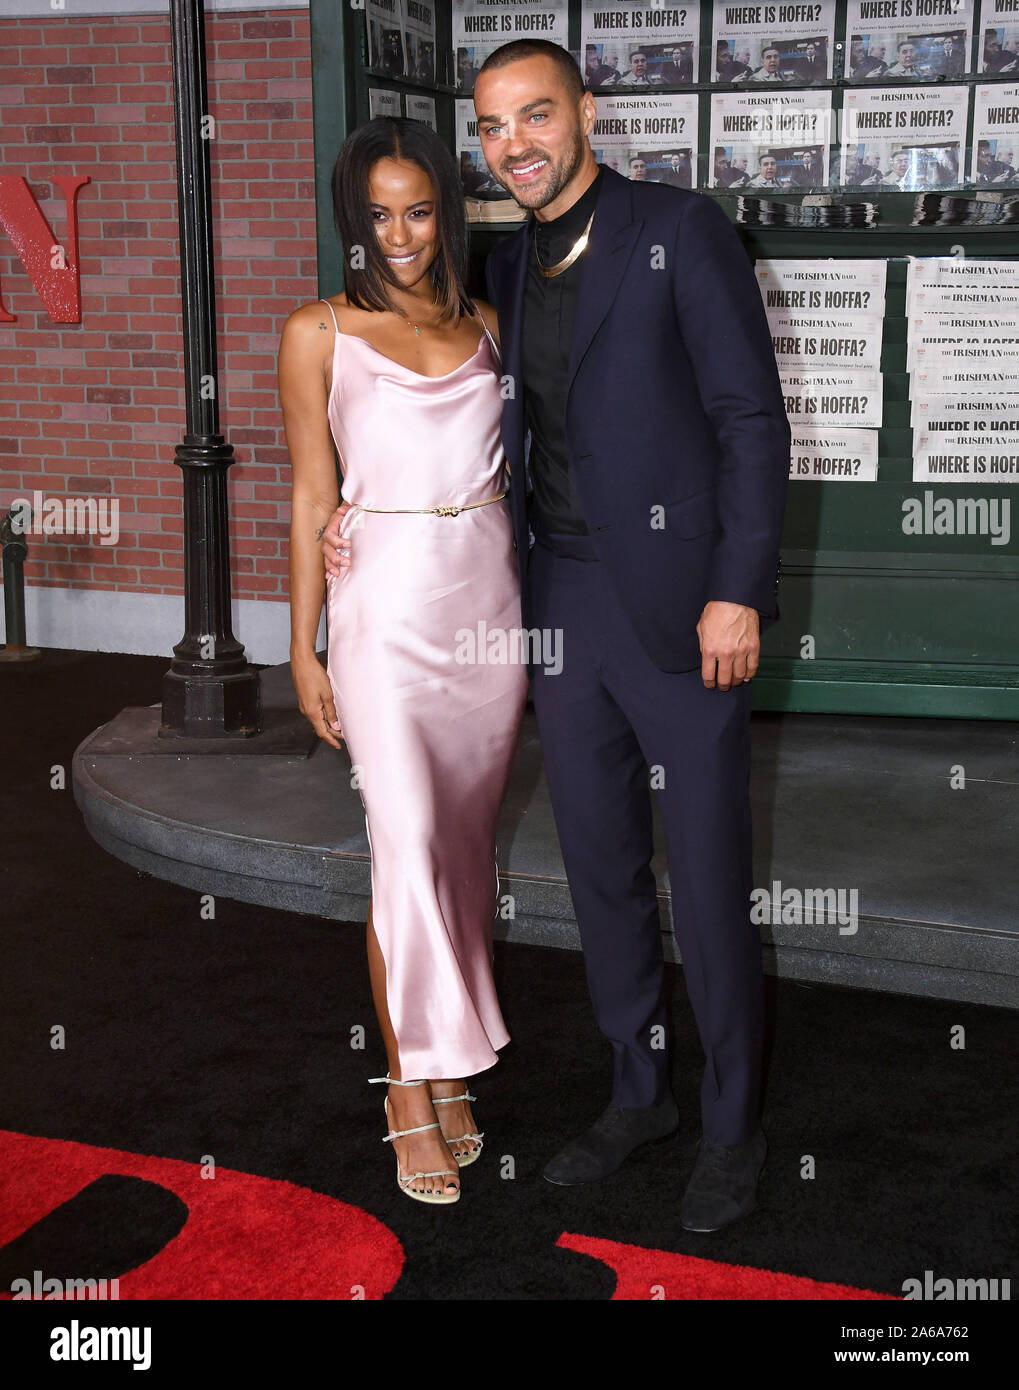 Hollywood, California, USA. 24th Oct, 2019. Jesse Williams, Taylour Paige. 'The Irishman' Los Angeles Premiere held at the TCL Chinese Theatre. Credit: Birdie Thompson/AdMedia/Newscom/Alamy Live News Stock Photo